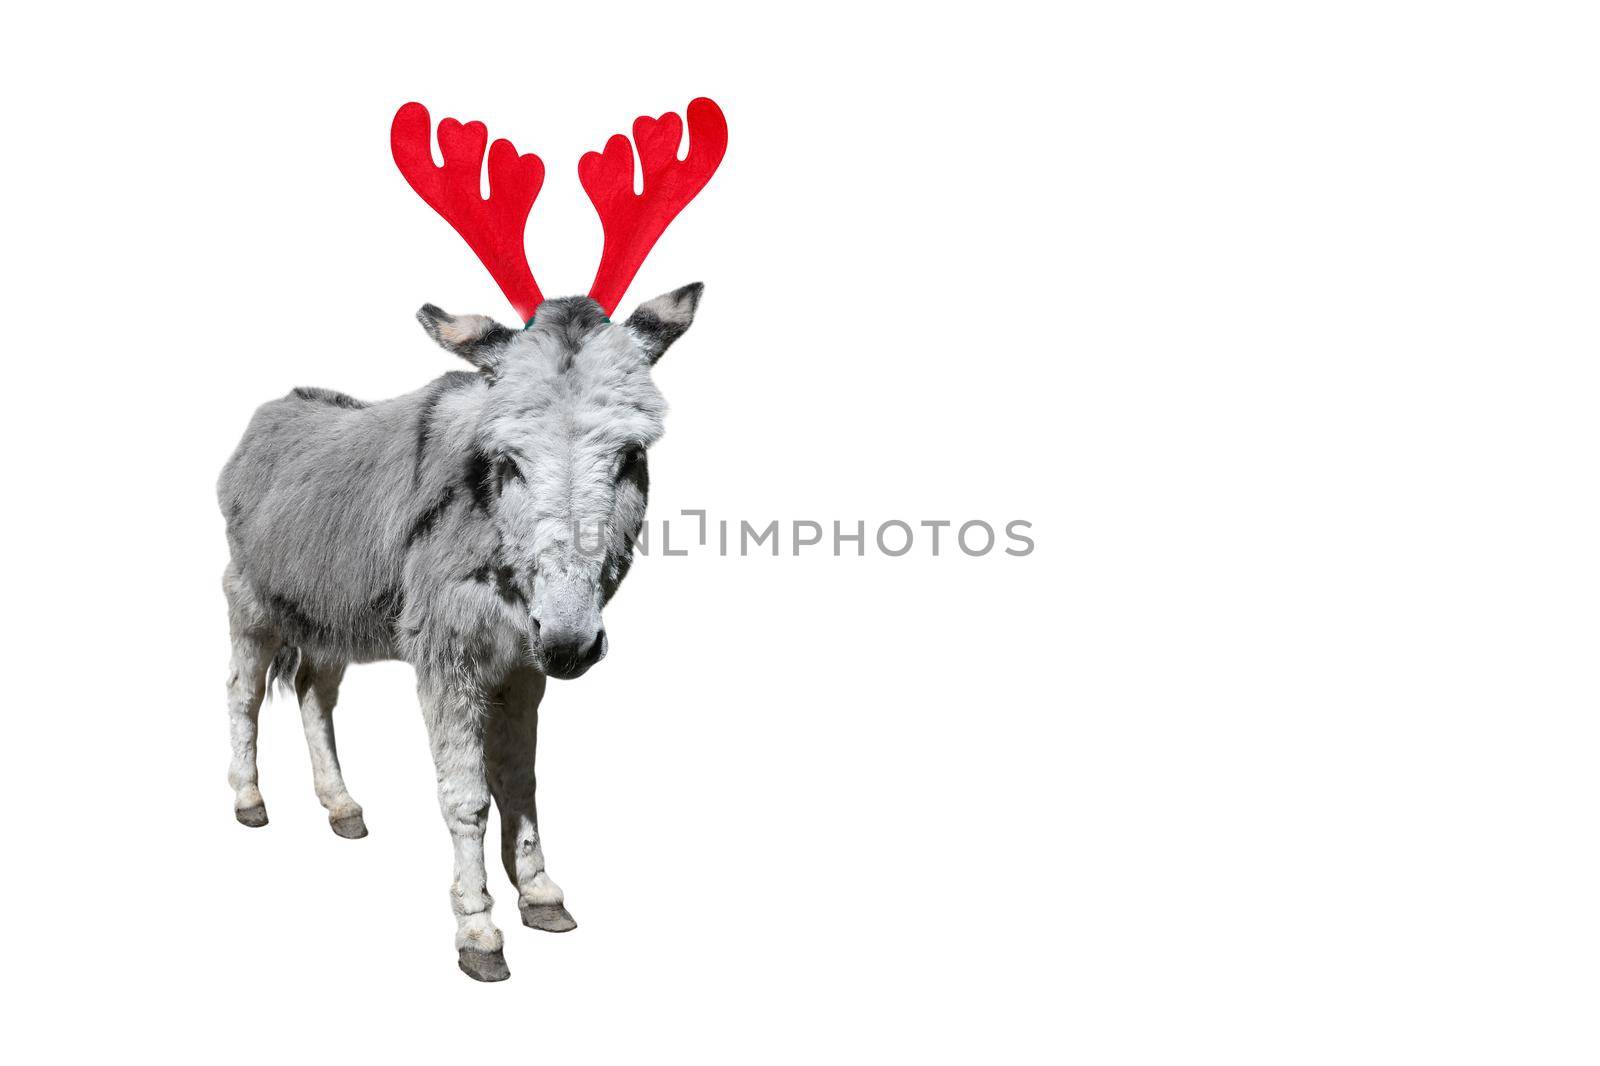 Christmas funny gray donkey isolated on white background. Full length donkey portrait in Christmas Reindeer Antlers Headband. Banner with copy space.